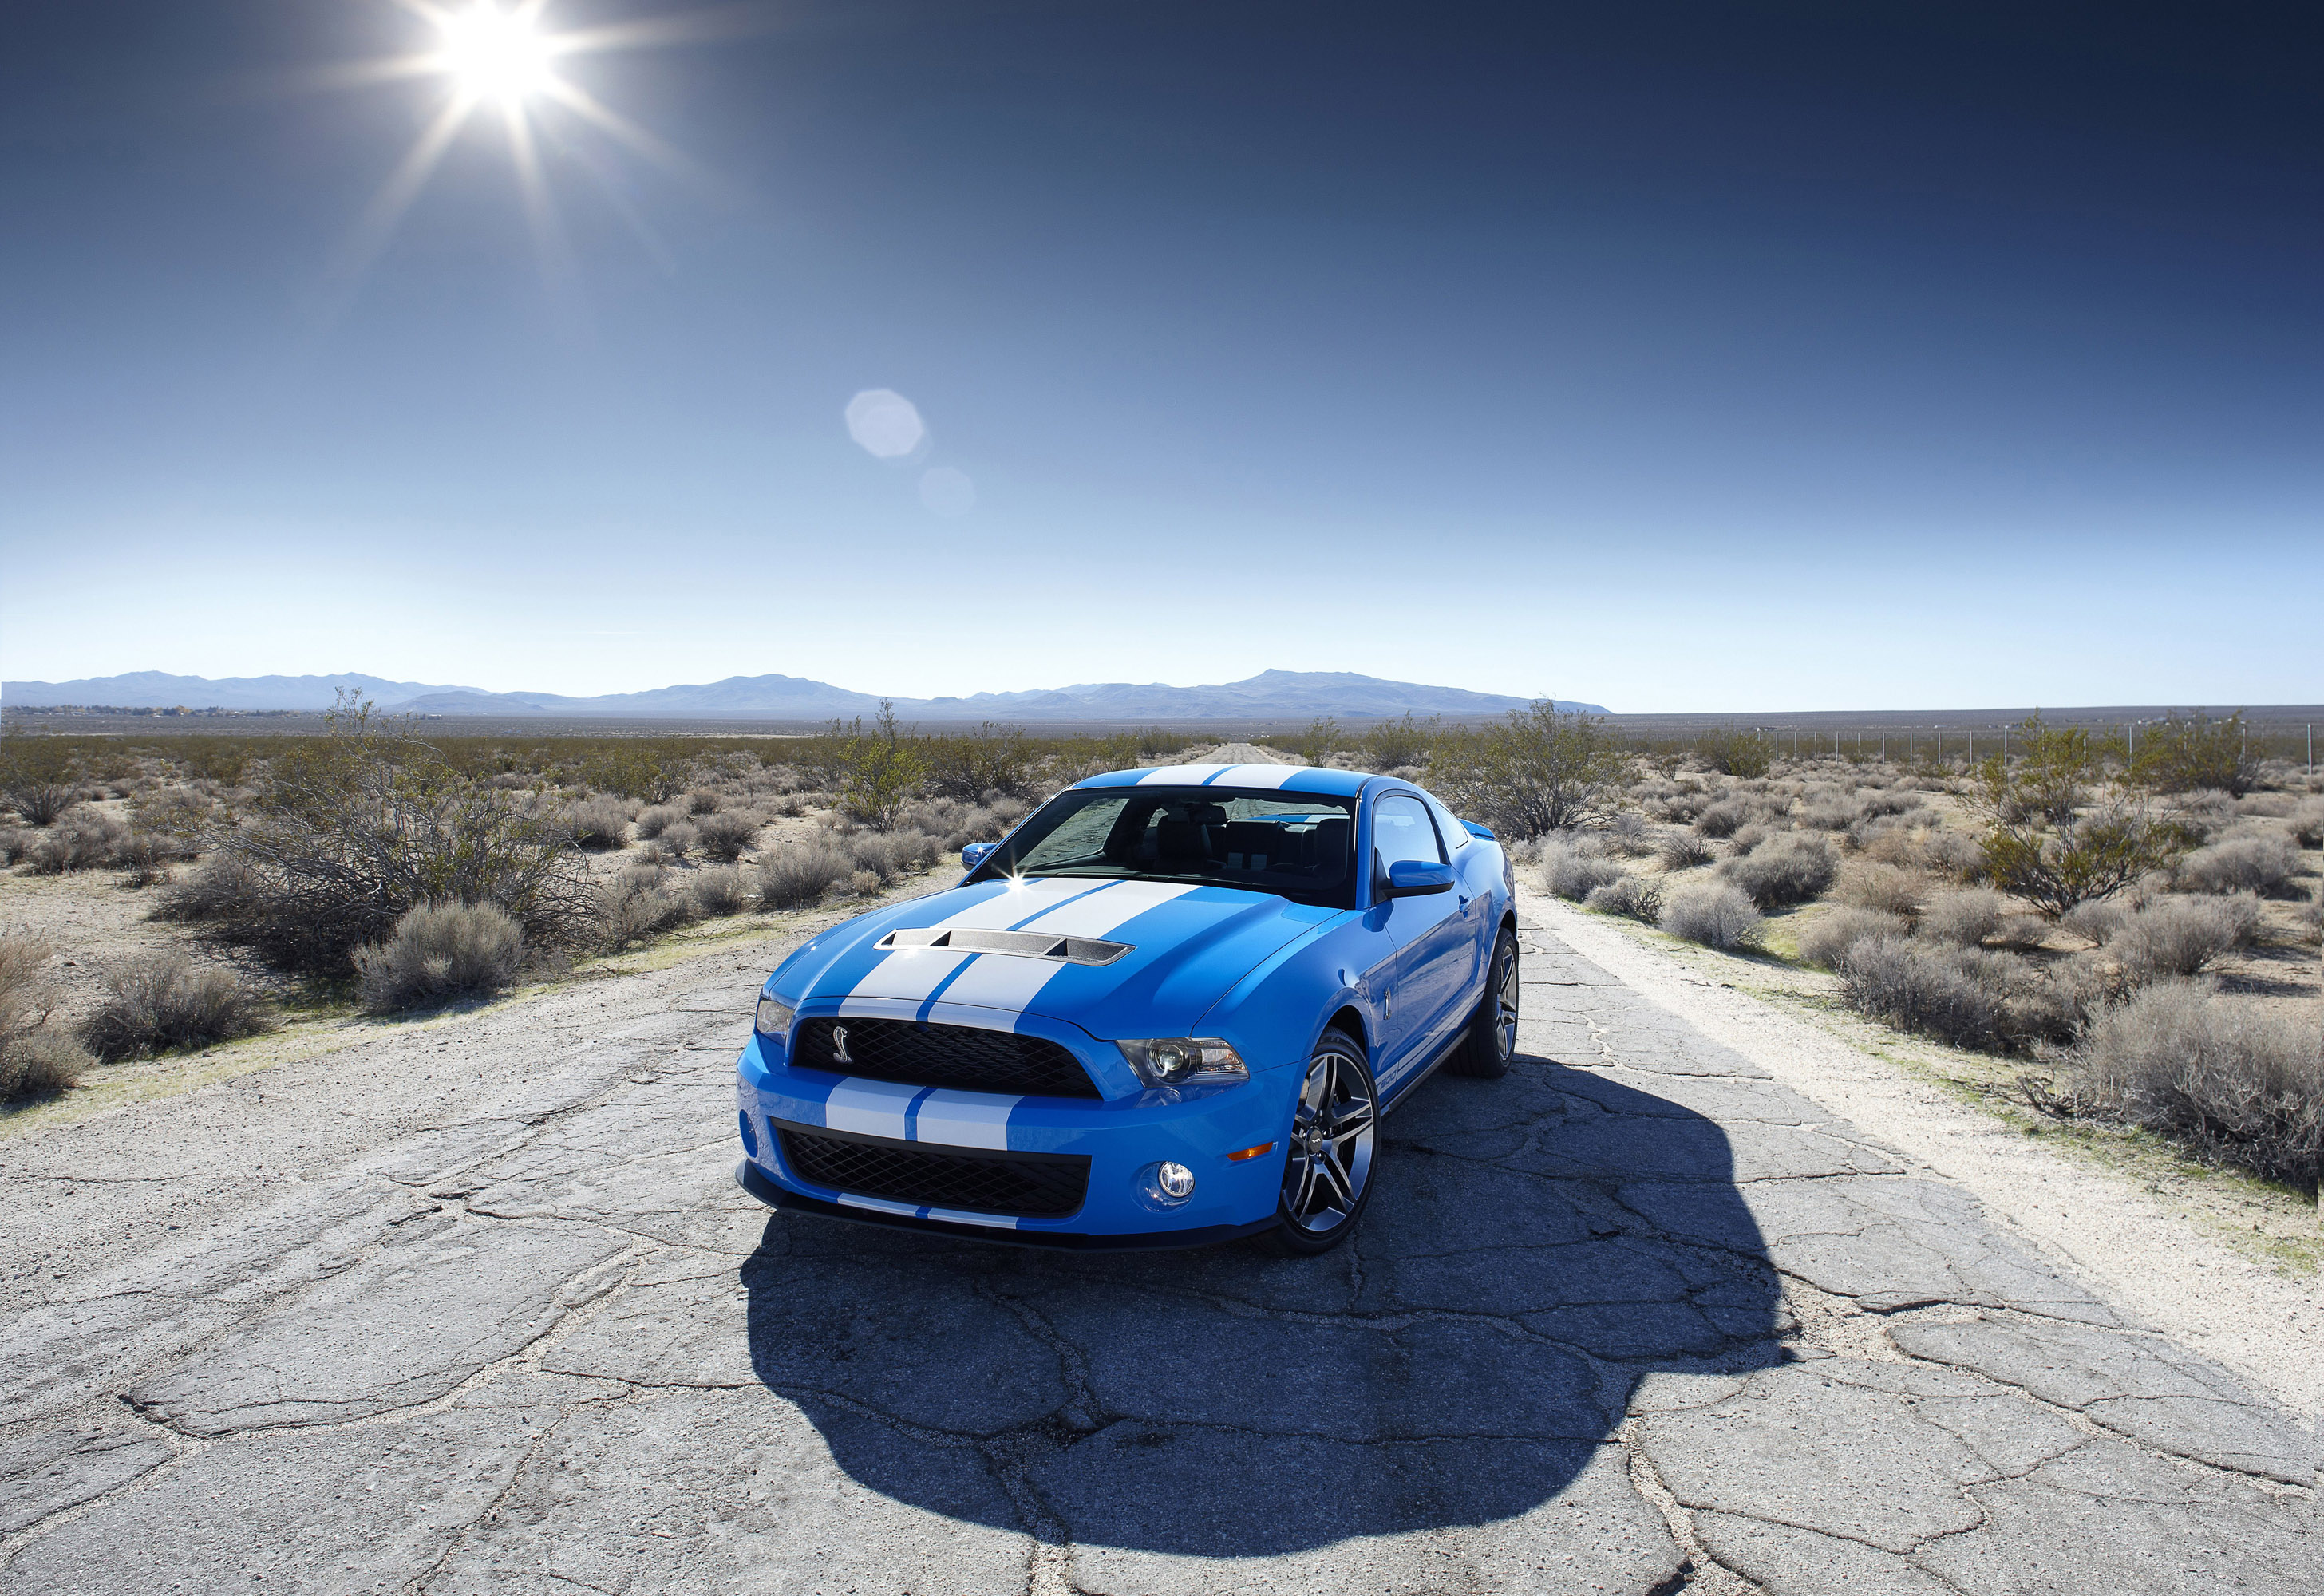 Mustang Shelby GT500 photo #1